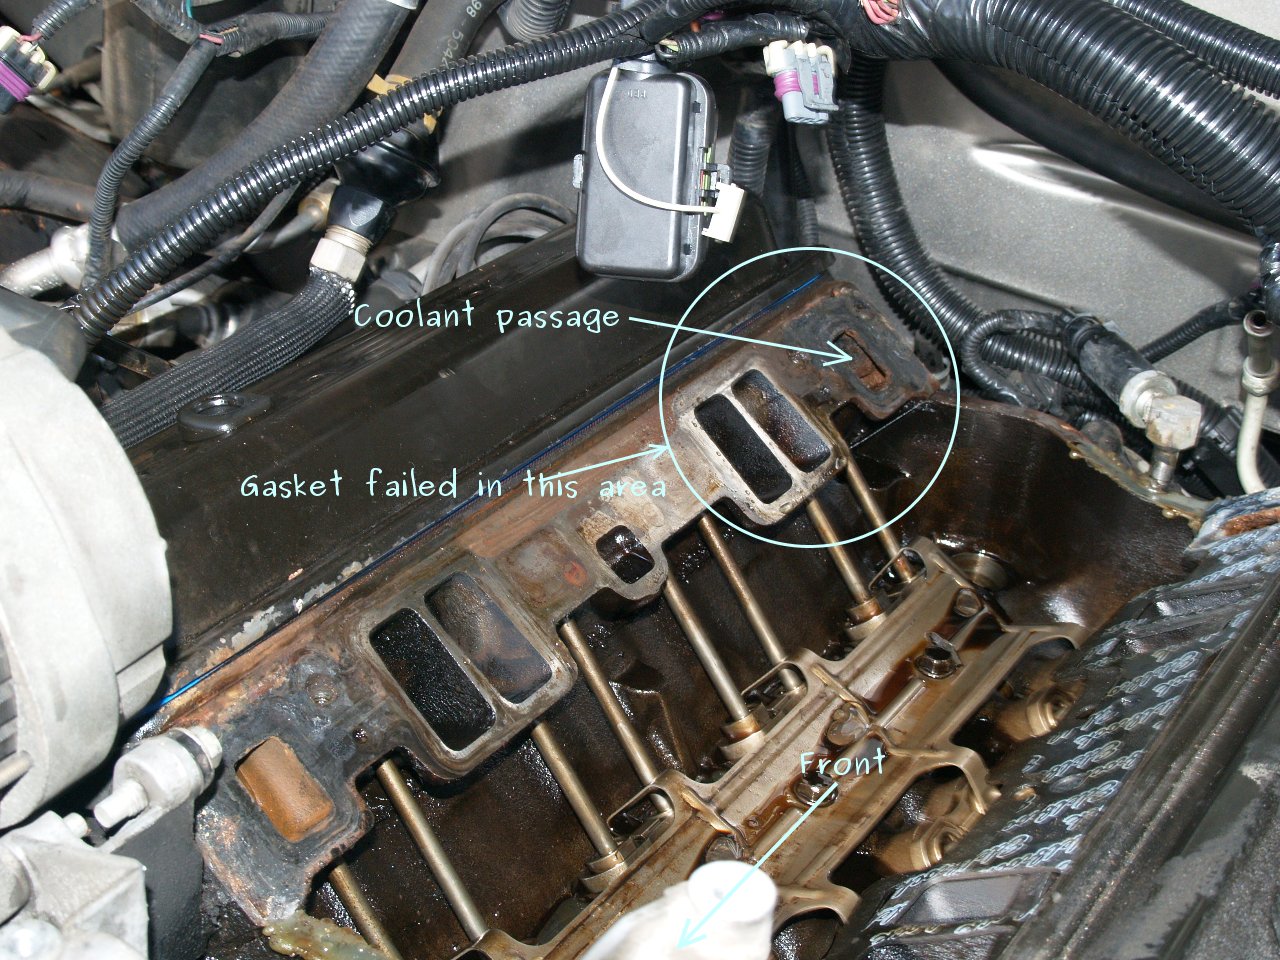 See P0AC5 in engine